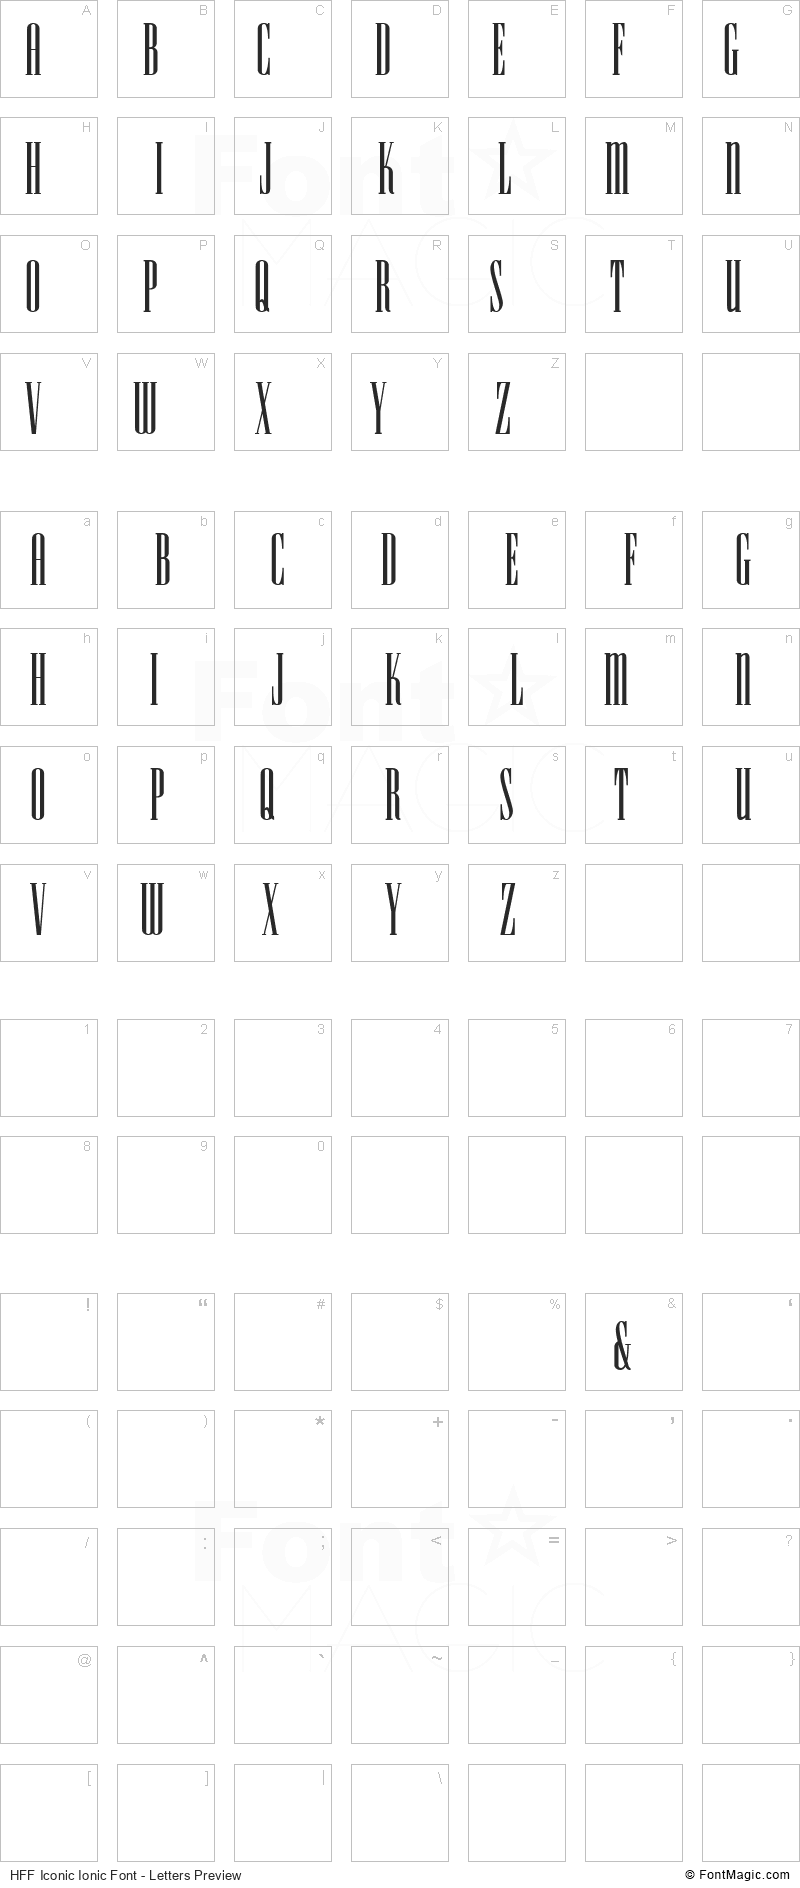 HFF Iconic Ionic Font - All Latters Preview Chart